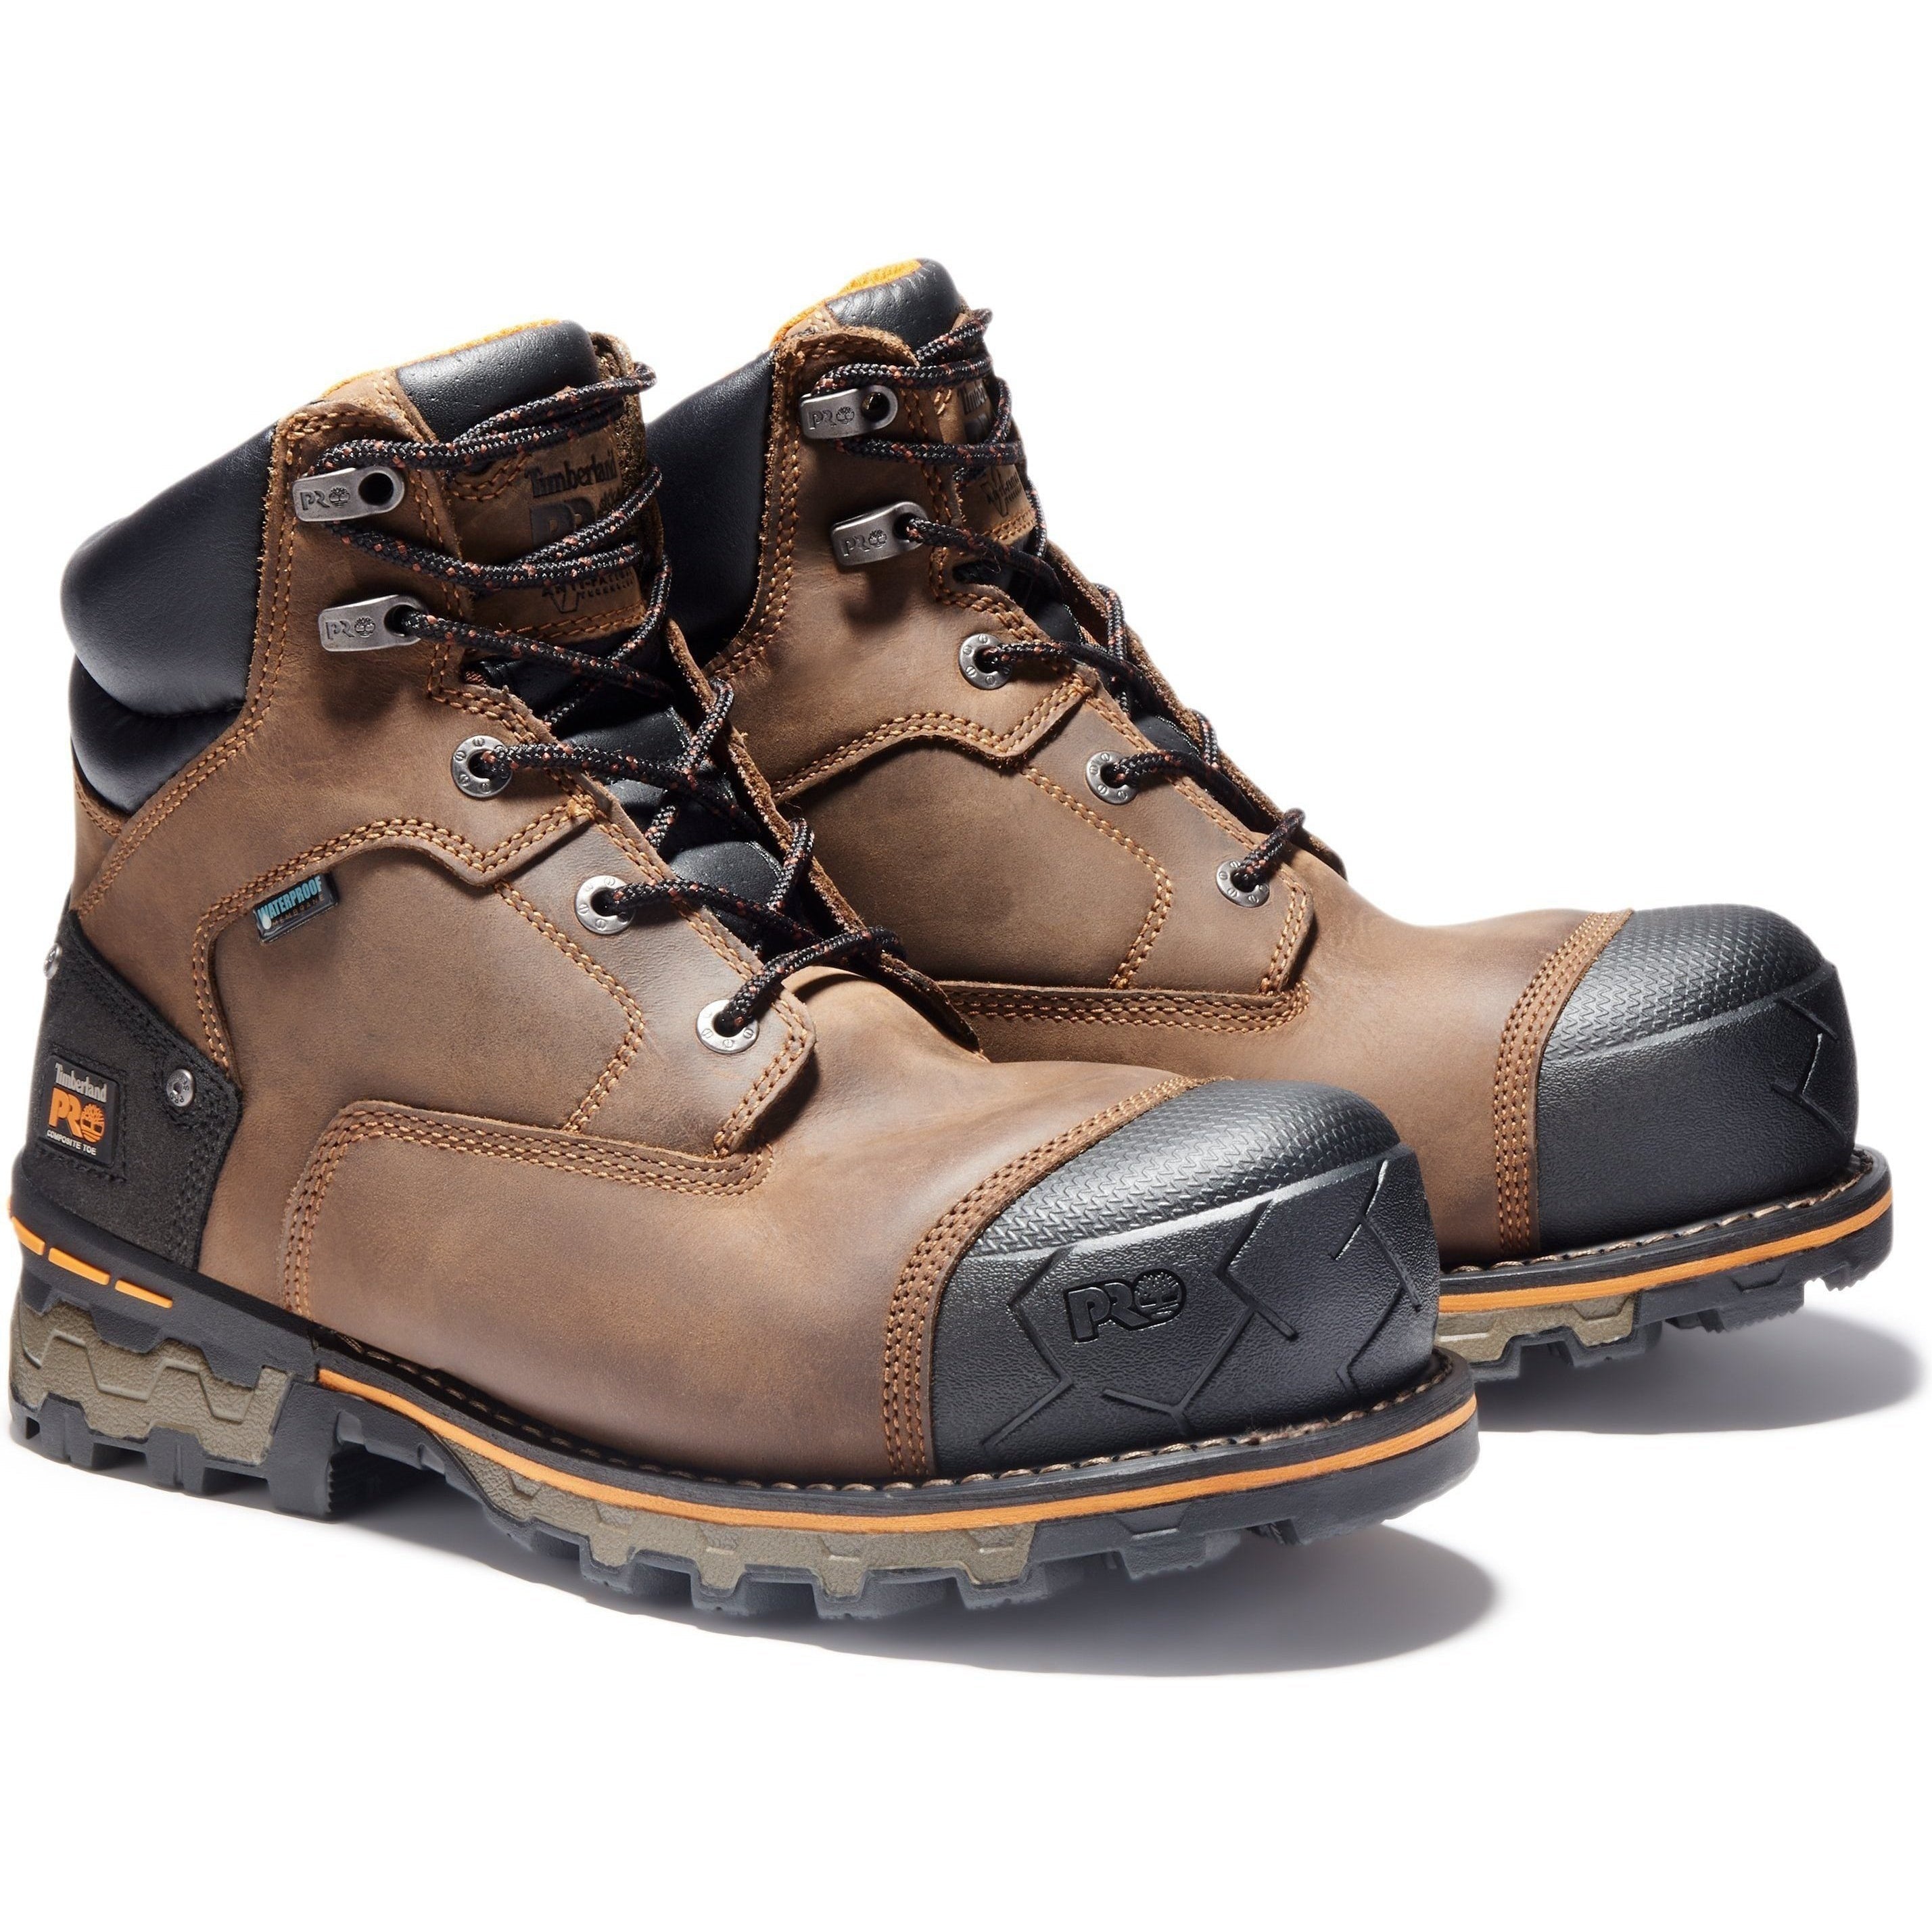 Timberland PRO Men's Boondock 6" Comp Toe WP Work Boots - TB192615214 7 / Medium / Brown Oiled Distressed - Overlook Boots